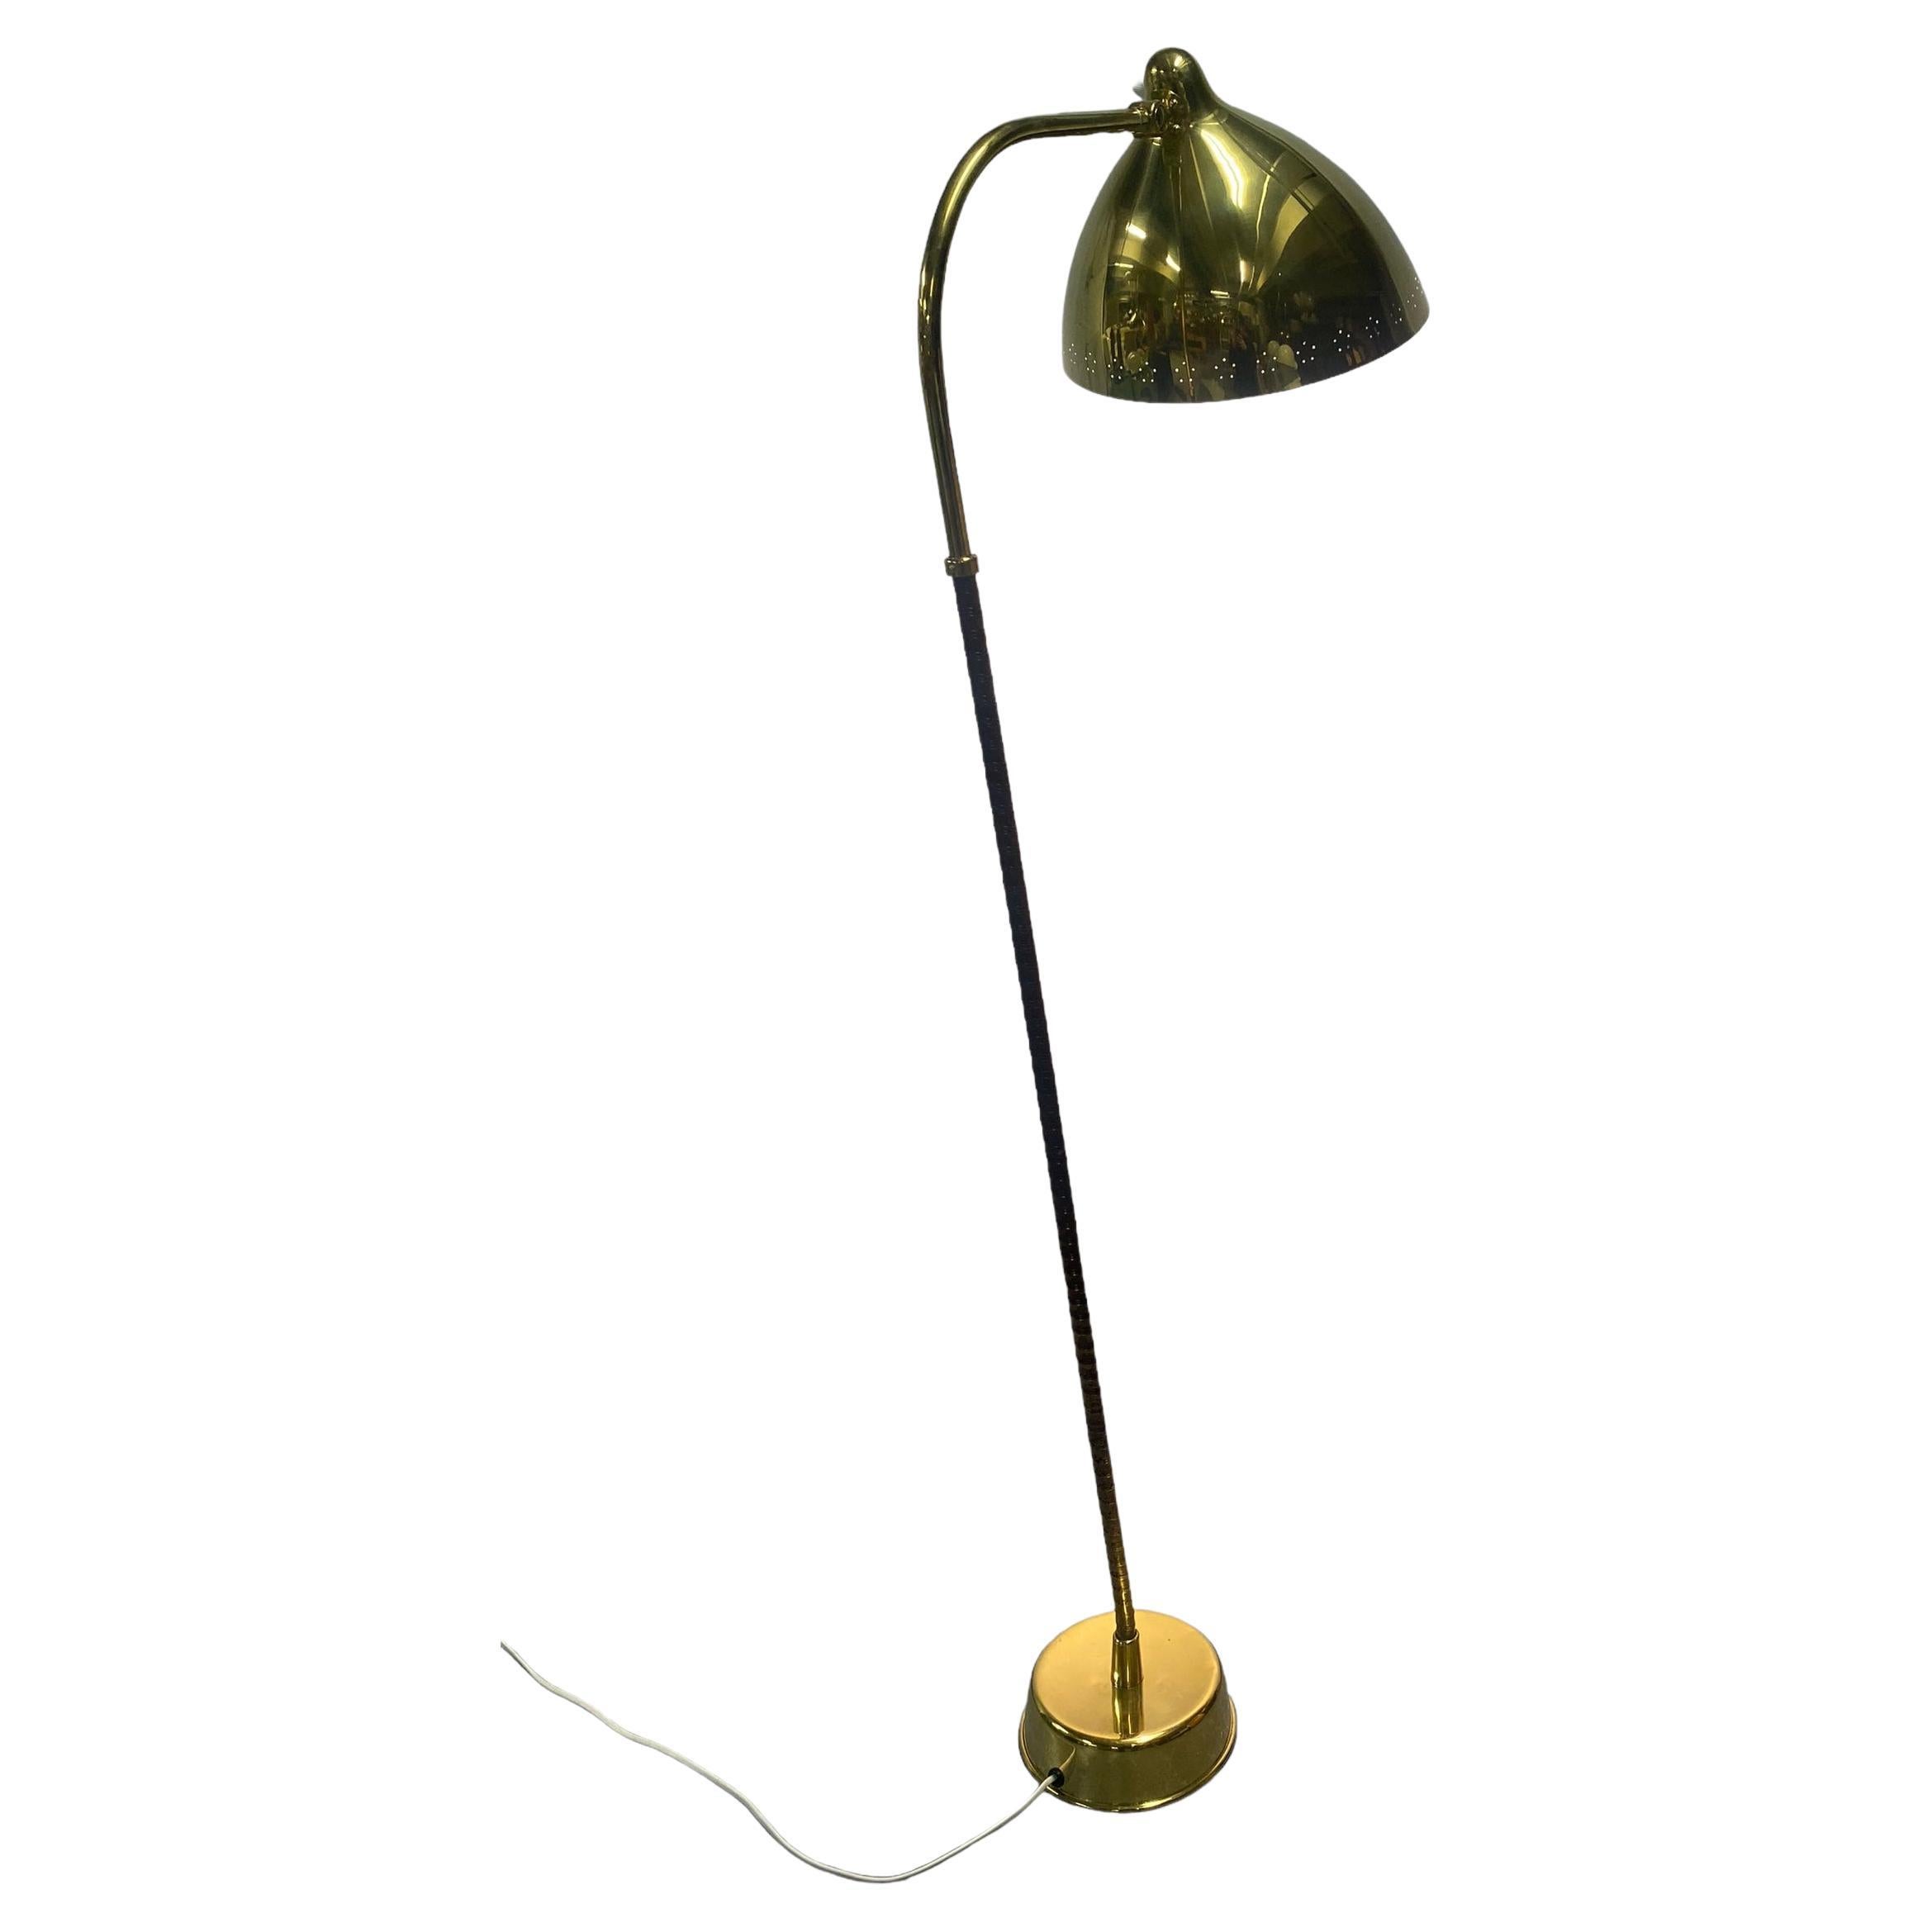 How tall should floor lamps be?